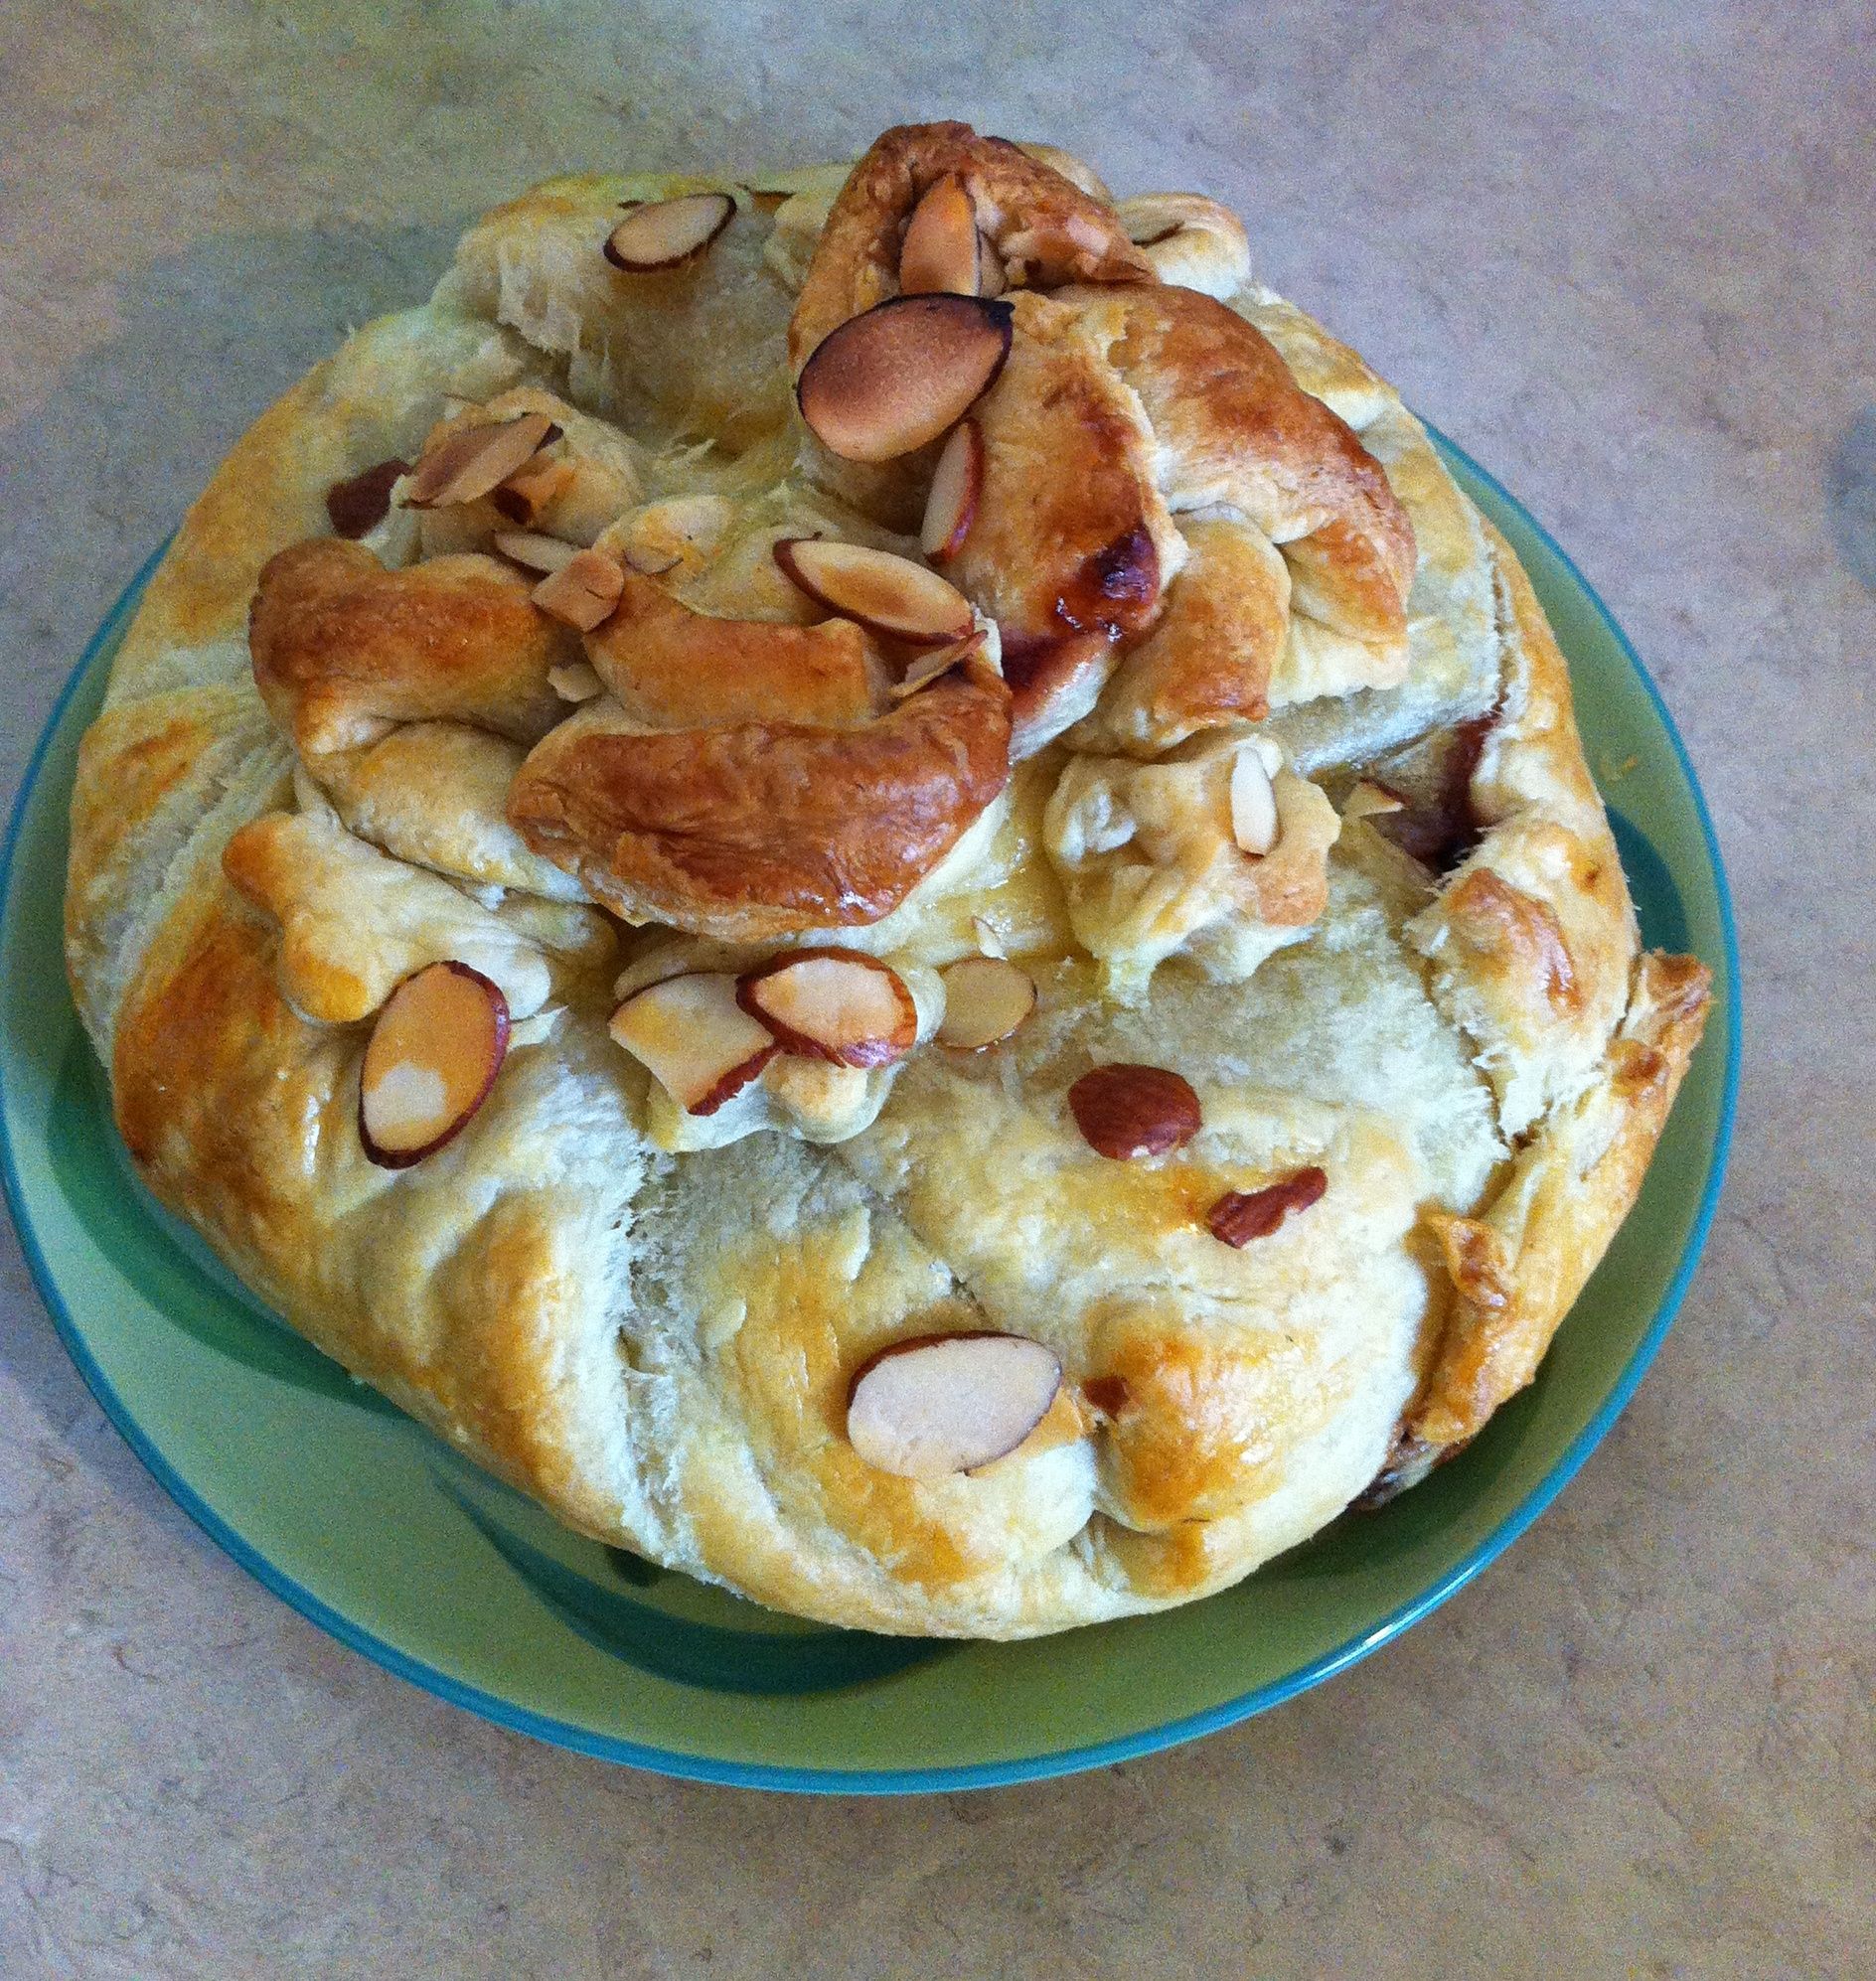 Baked Brie with Raspberry Jam and Toasted Almonds